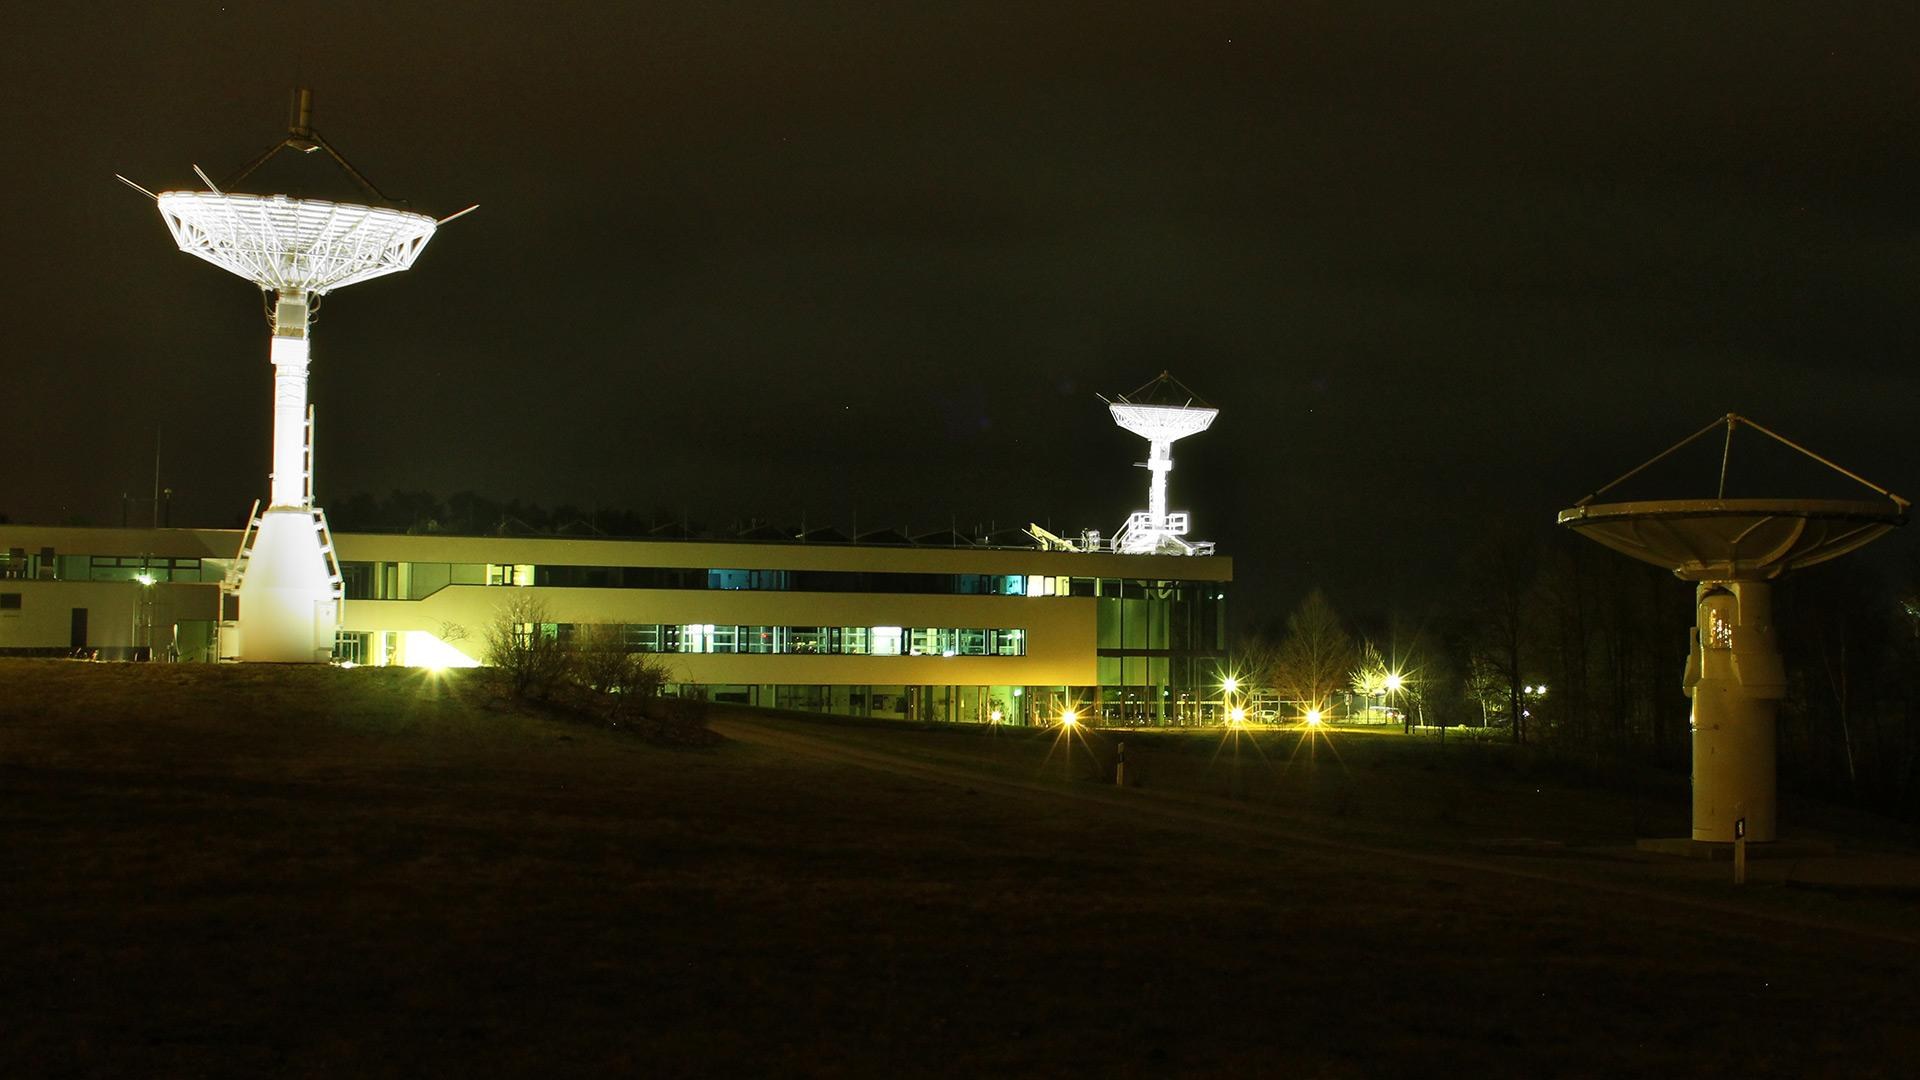 Space weather research at the DLR Neustrelitz site